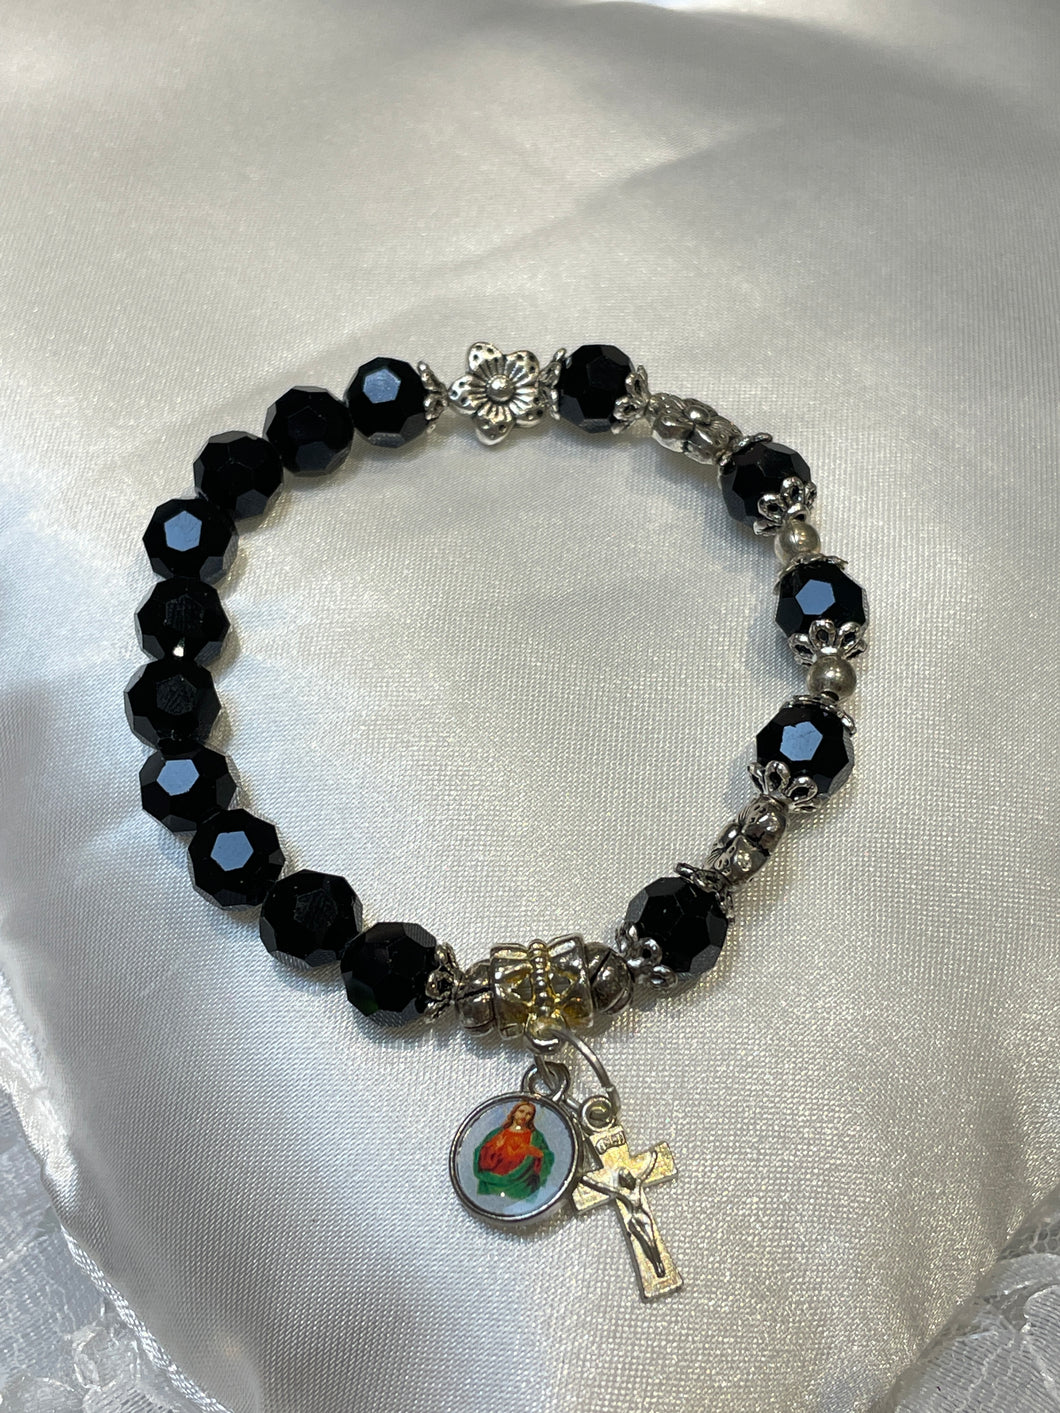 Black Gemstone Rosary Bracelet with Sacred Heart of Jesus Image and Crucifix Charms